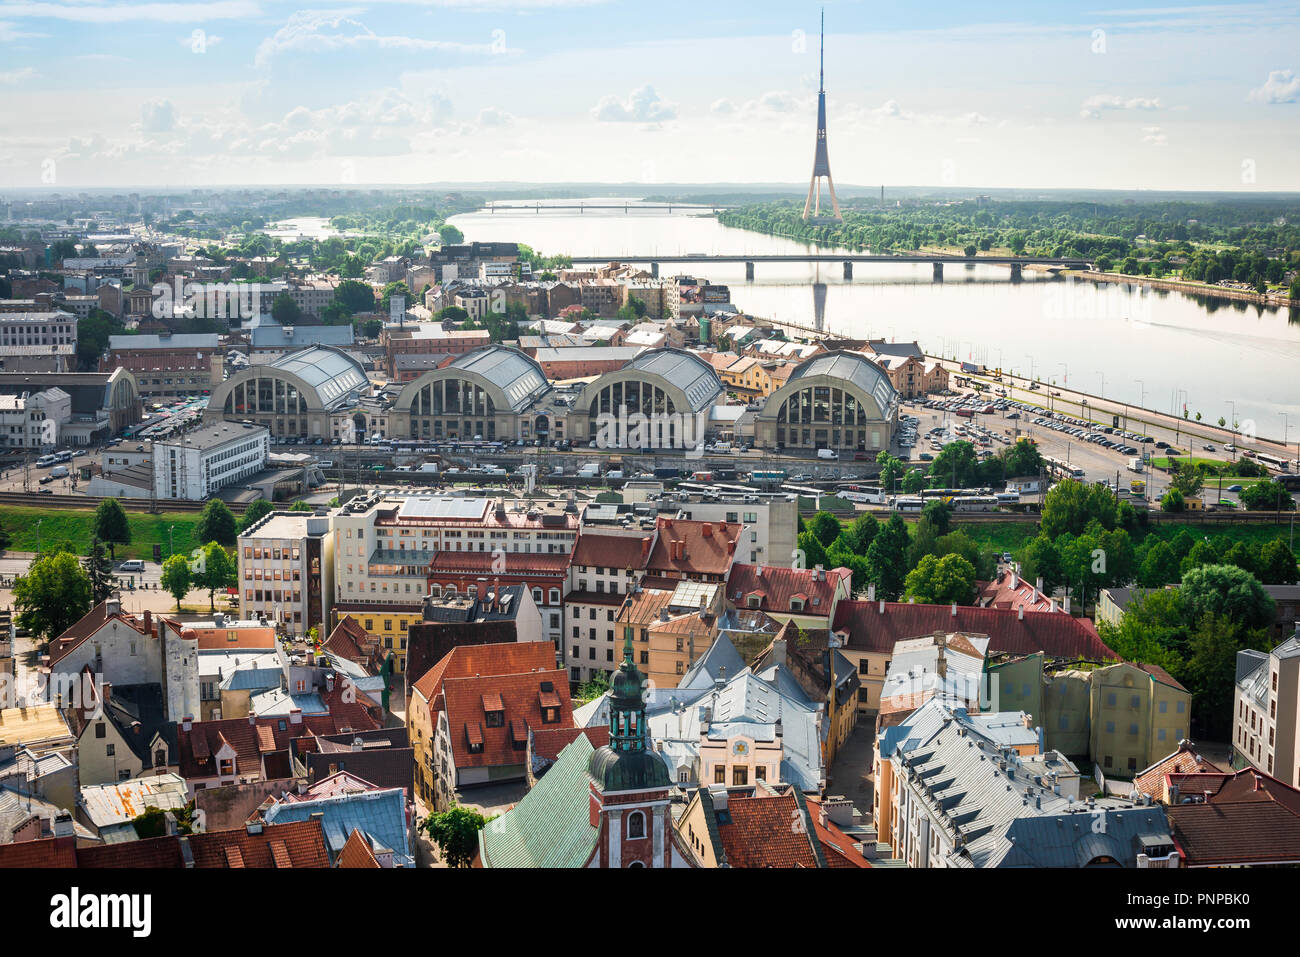 Riga cityscape, view south over Riga Old Town towards the Central Market Zeppelin hangar buildings and the 'Moscow Suburb' beyond, Latvia. Stock Photo